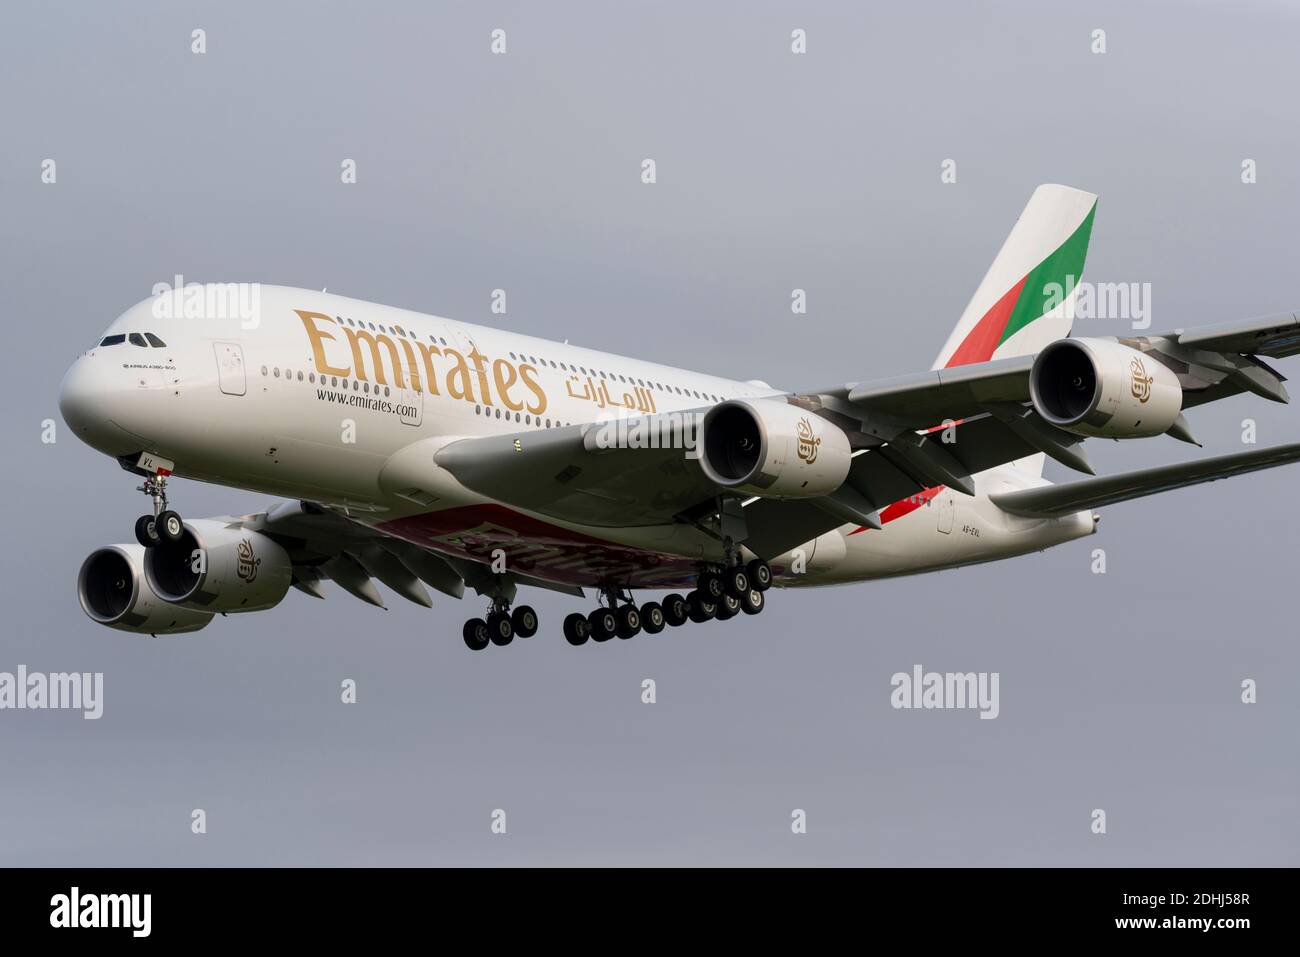 New Emirates Airbis A380 jet airliner plane A6-EVL. Only second A380 delivered from factory in 2020, and the last customer before A380 production ends Stock Photo